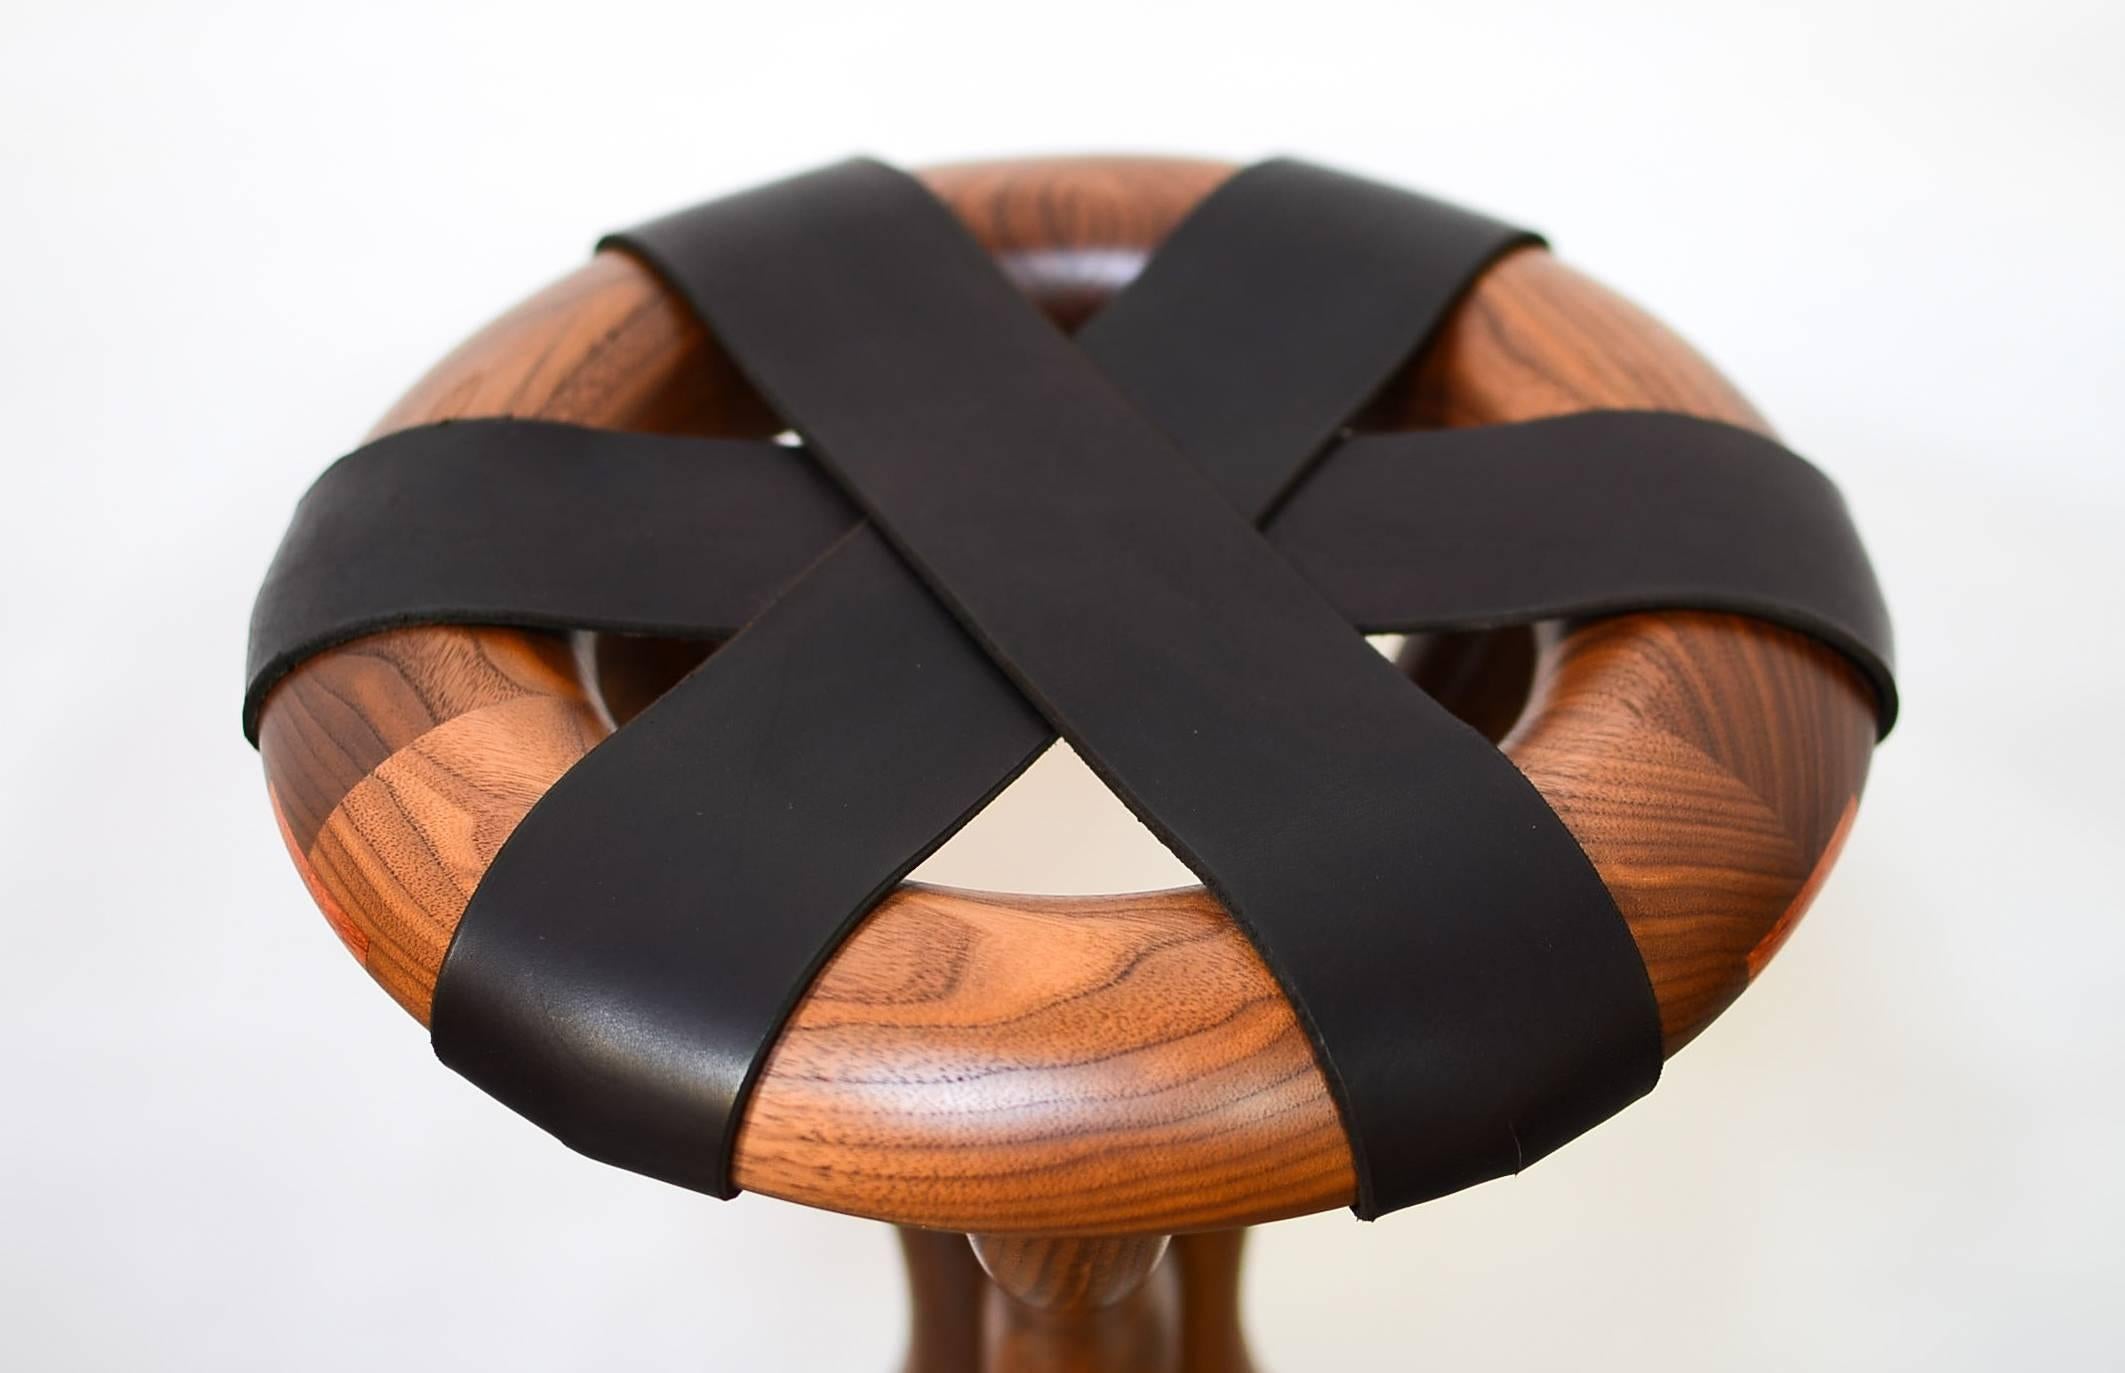 Bubinga Black Walnut and Leather Stool by Dean Santner For Sale